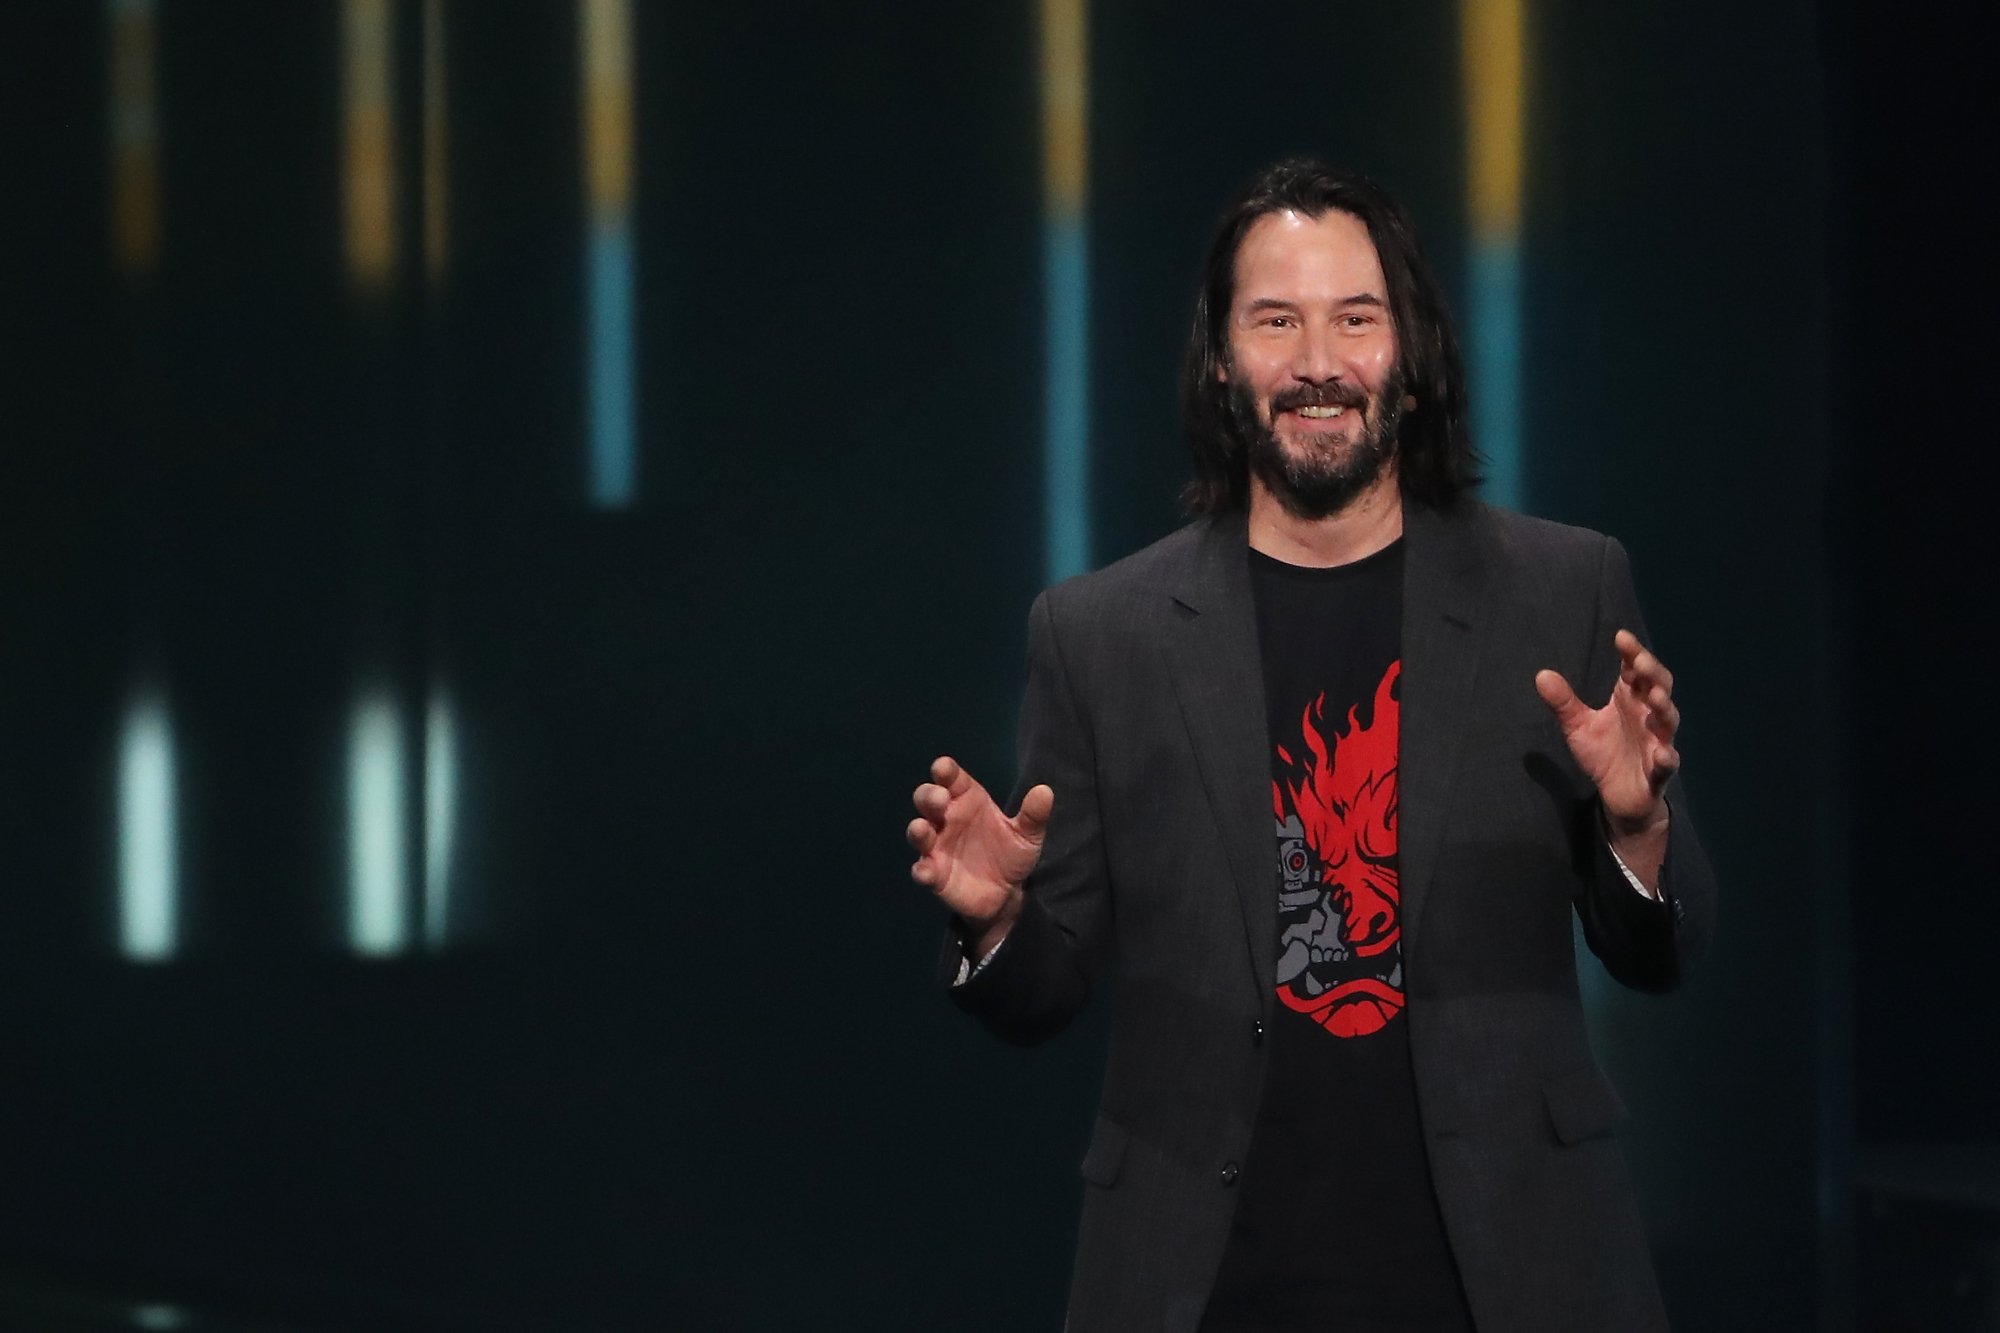 'Cyberpunk 2077' actor Keanu Reeves smiling and holding his hands up at game event